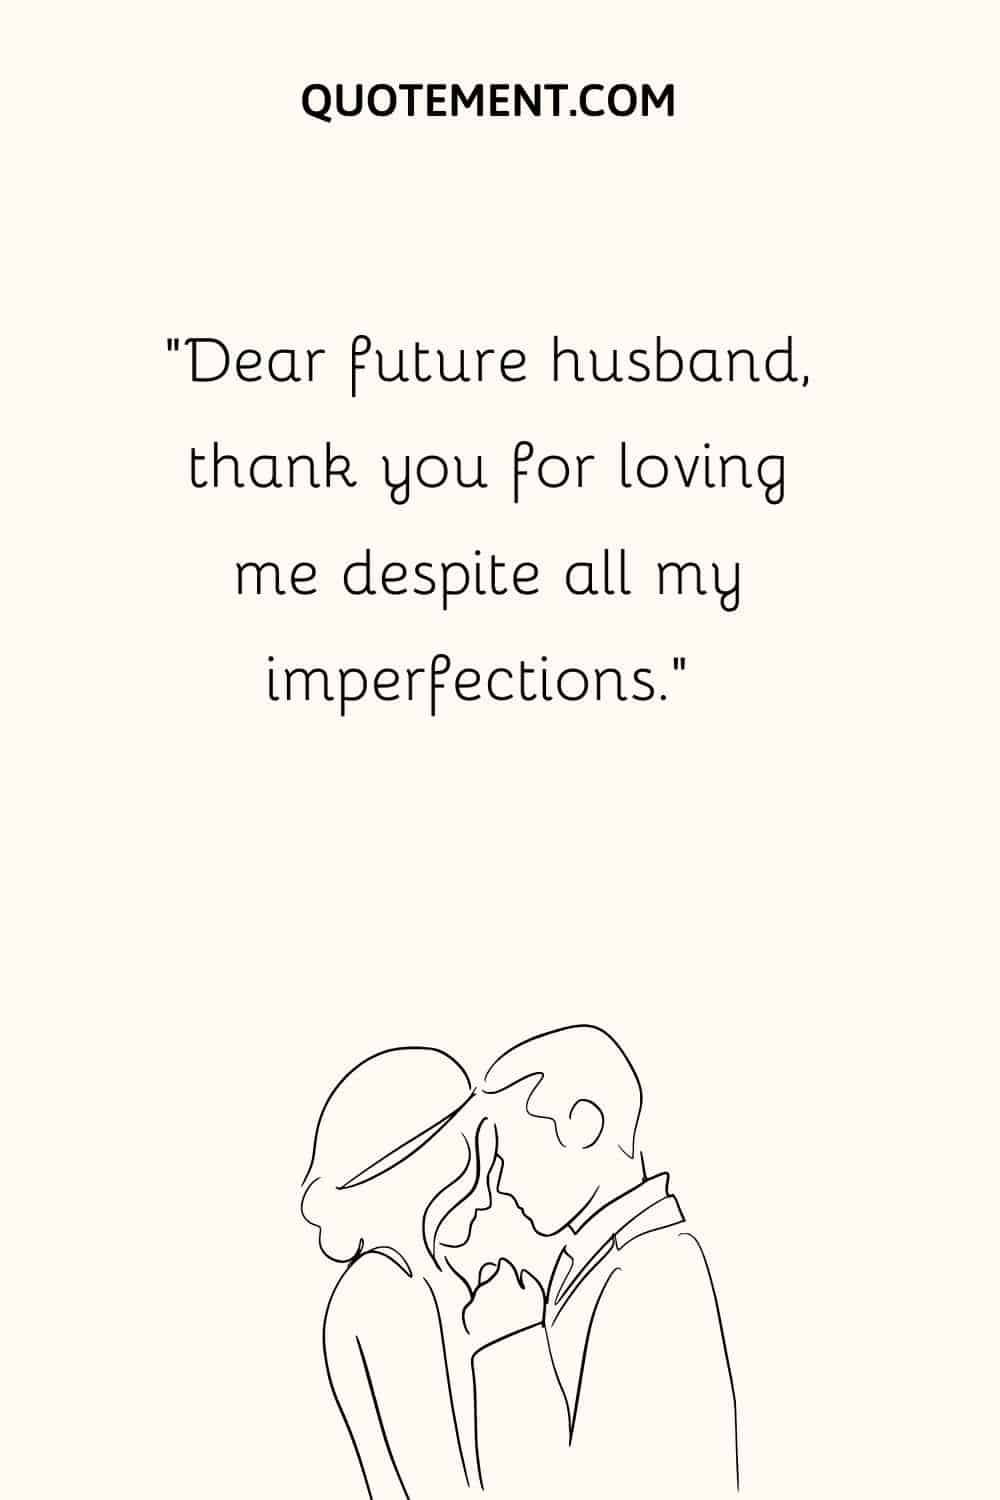 “Dear future husband, thank you for loving me despite all my imperfections.” 